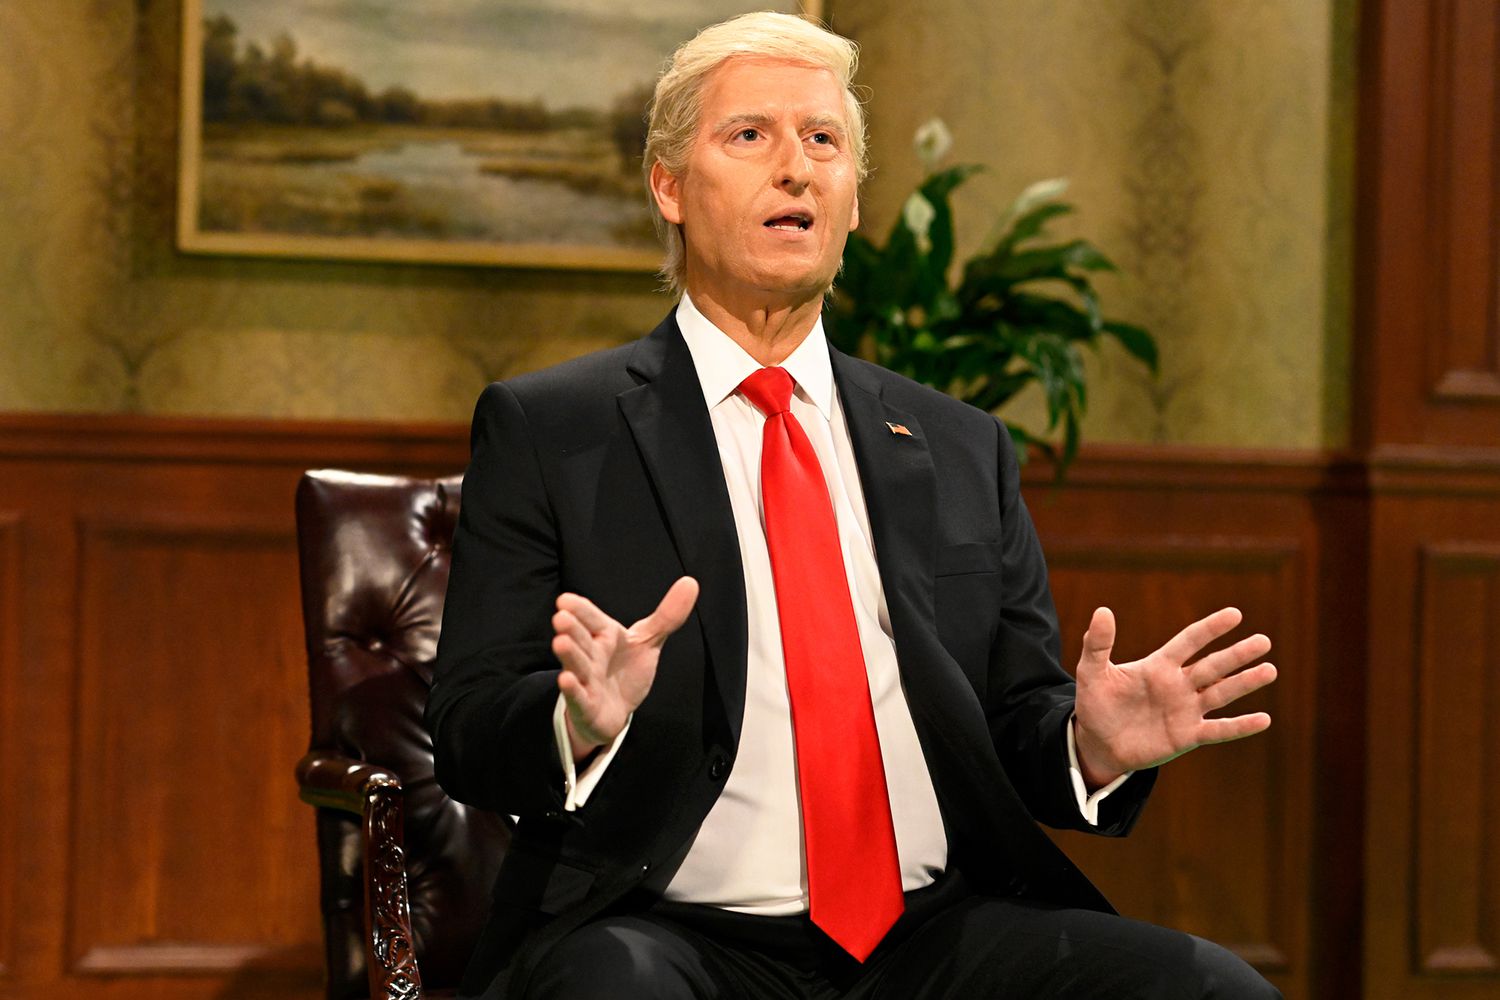 SATURDAY NIGHT LIVE -- "Kieran Culkin" Episode 1810 -- Pictured: James Austin Johnson as Donald Trump during the "Aaron Rodgers Trump" Cold Open on Saturday, November 6, 2021